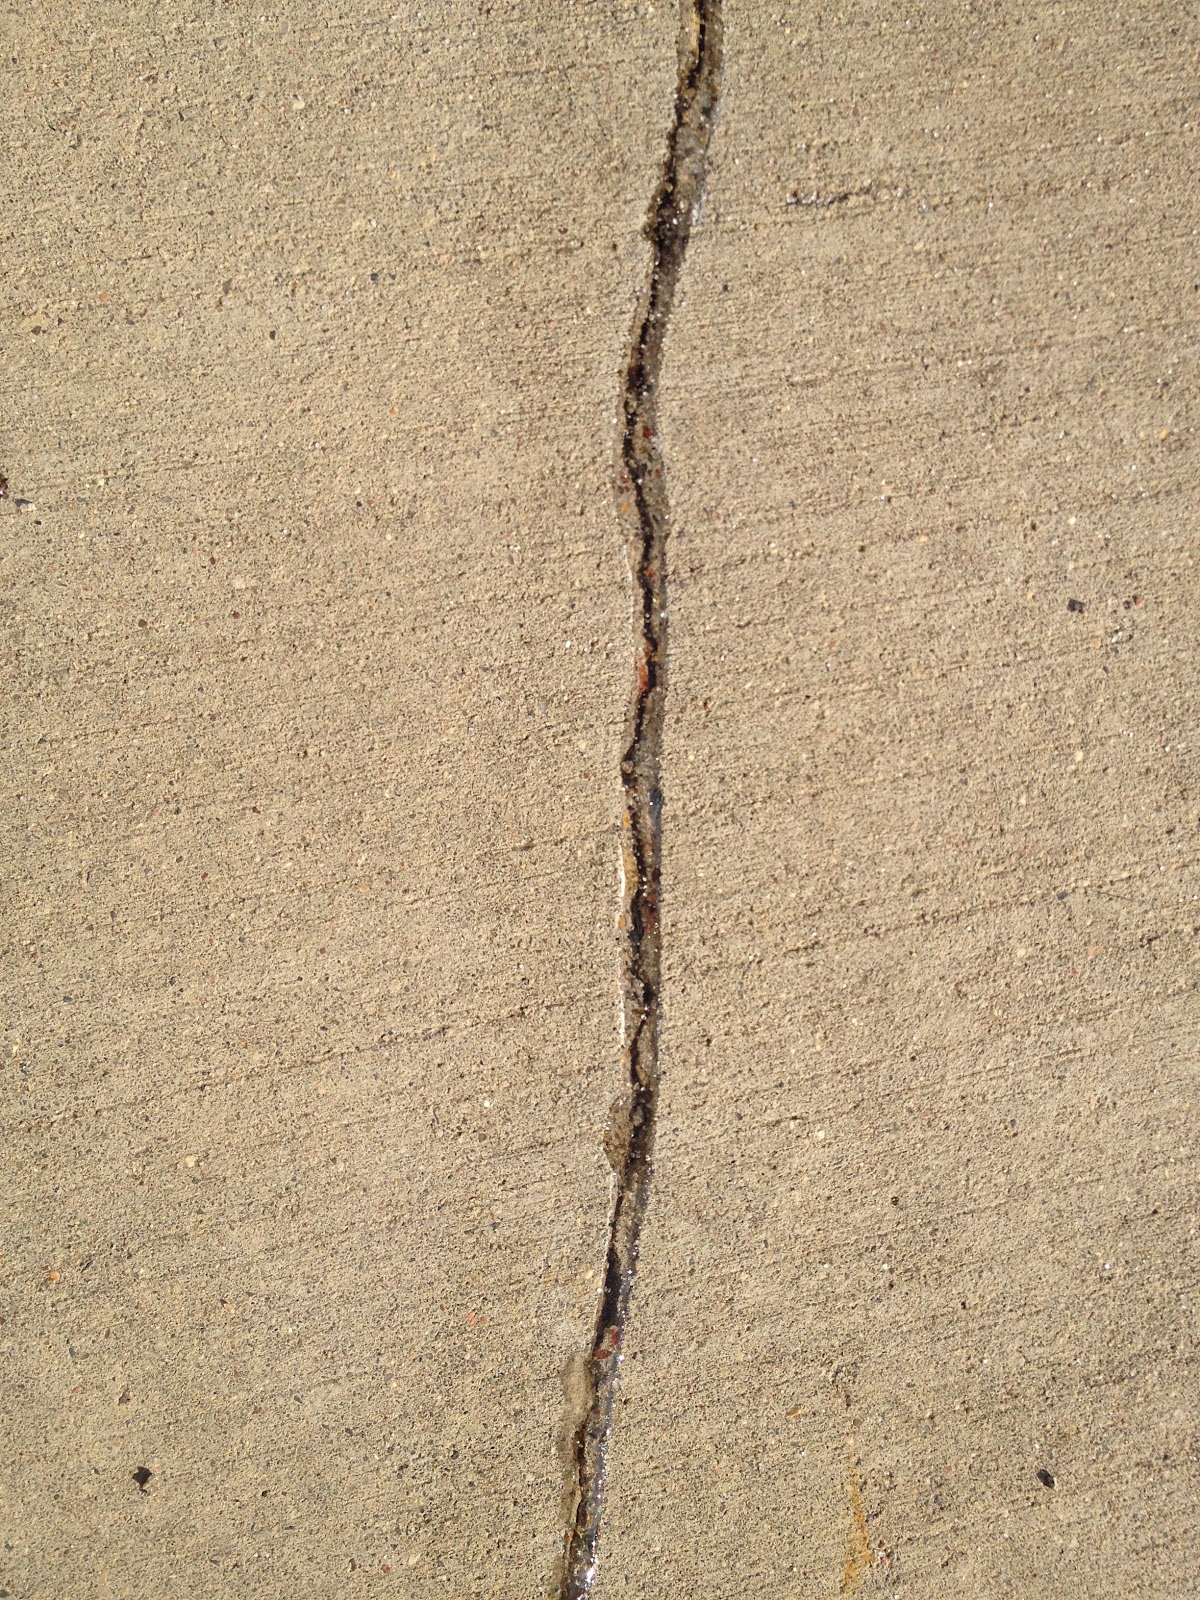 how to fix hairline crack in concrete driveway